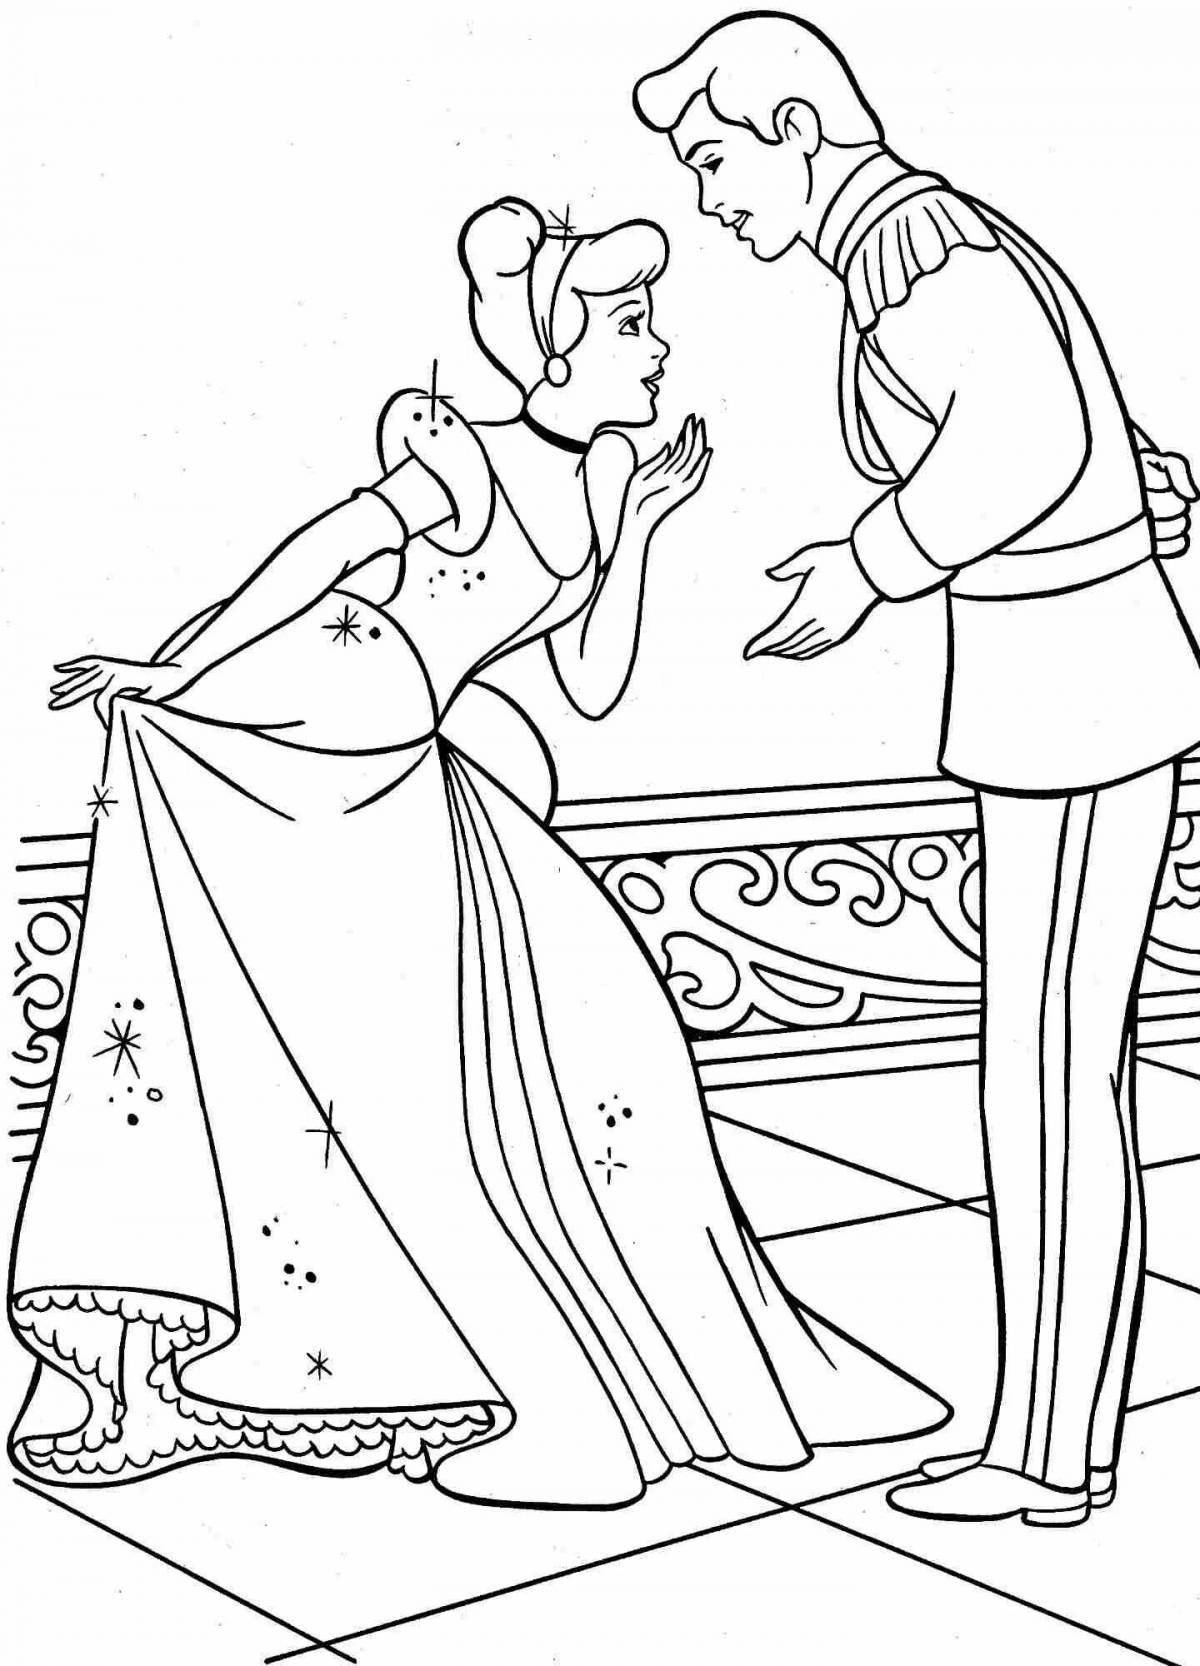 Charming cinderella and the prince coloring book